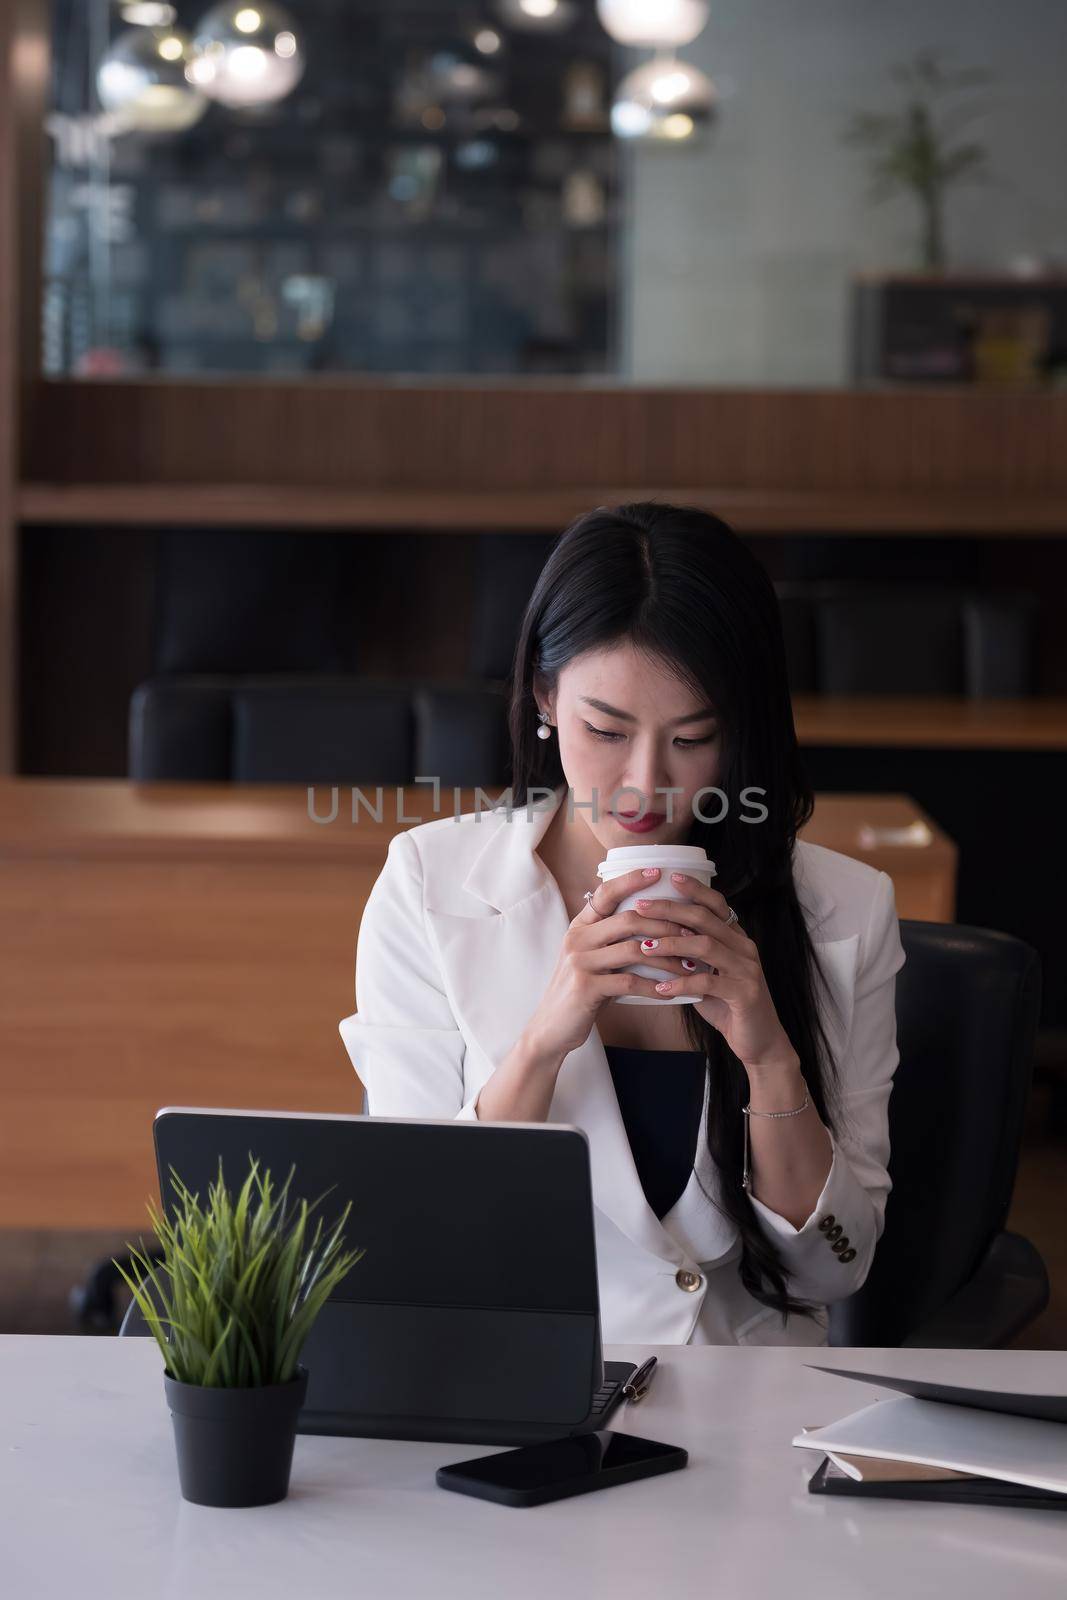 Portrait of business or accountant sitting at desk in modern office with interior drinking hot beverage holding cup in hands while video conference meeting.